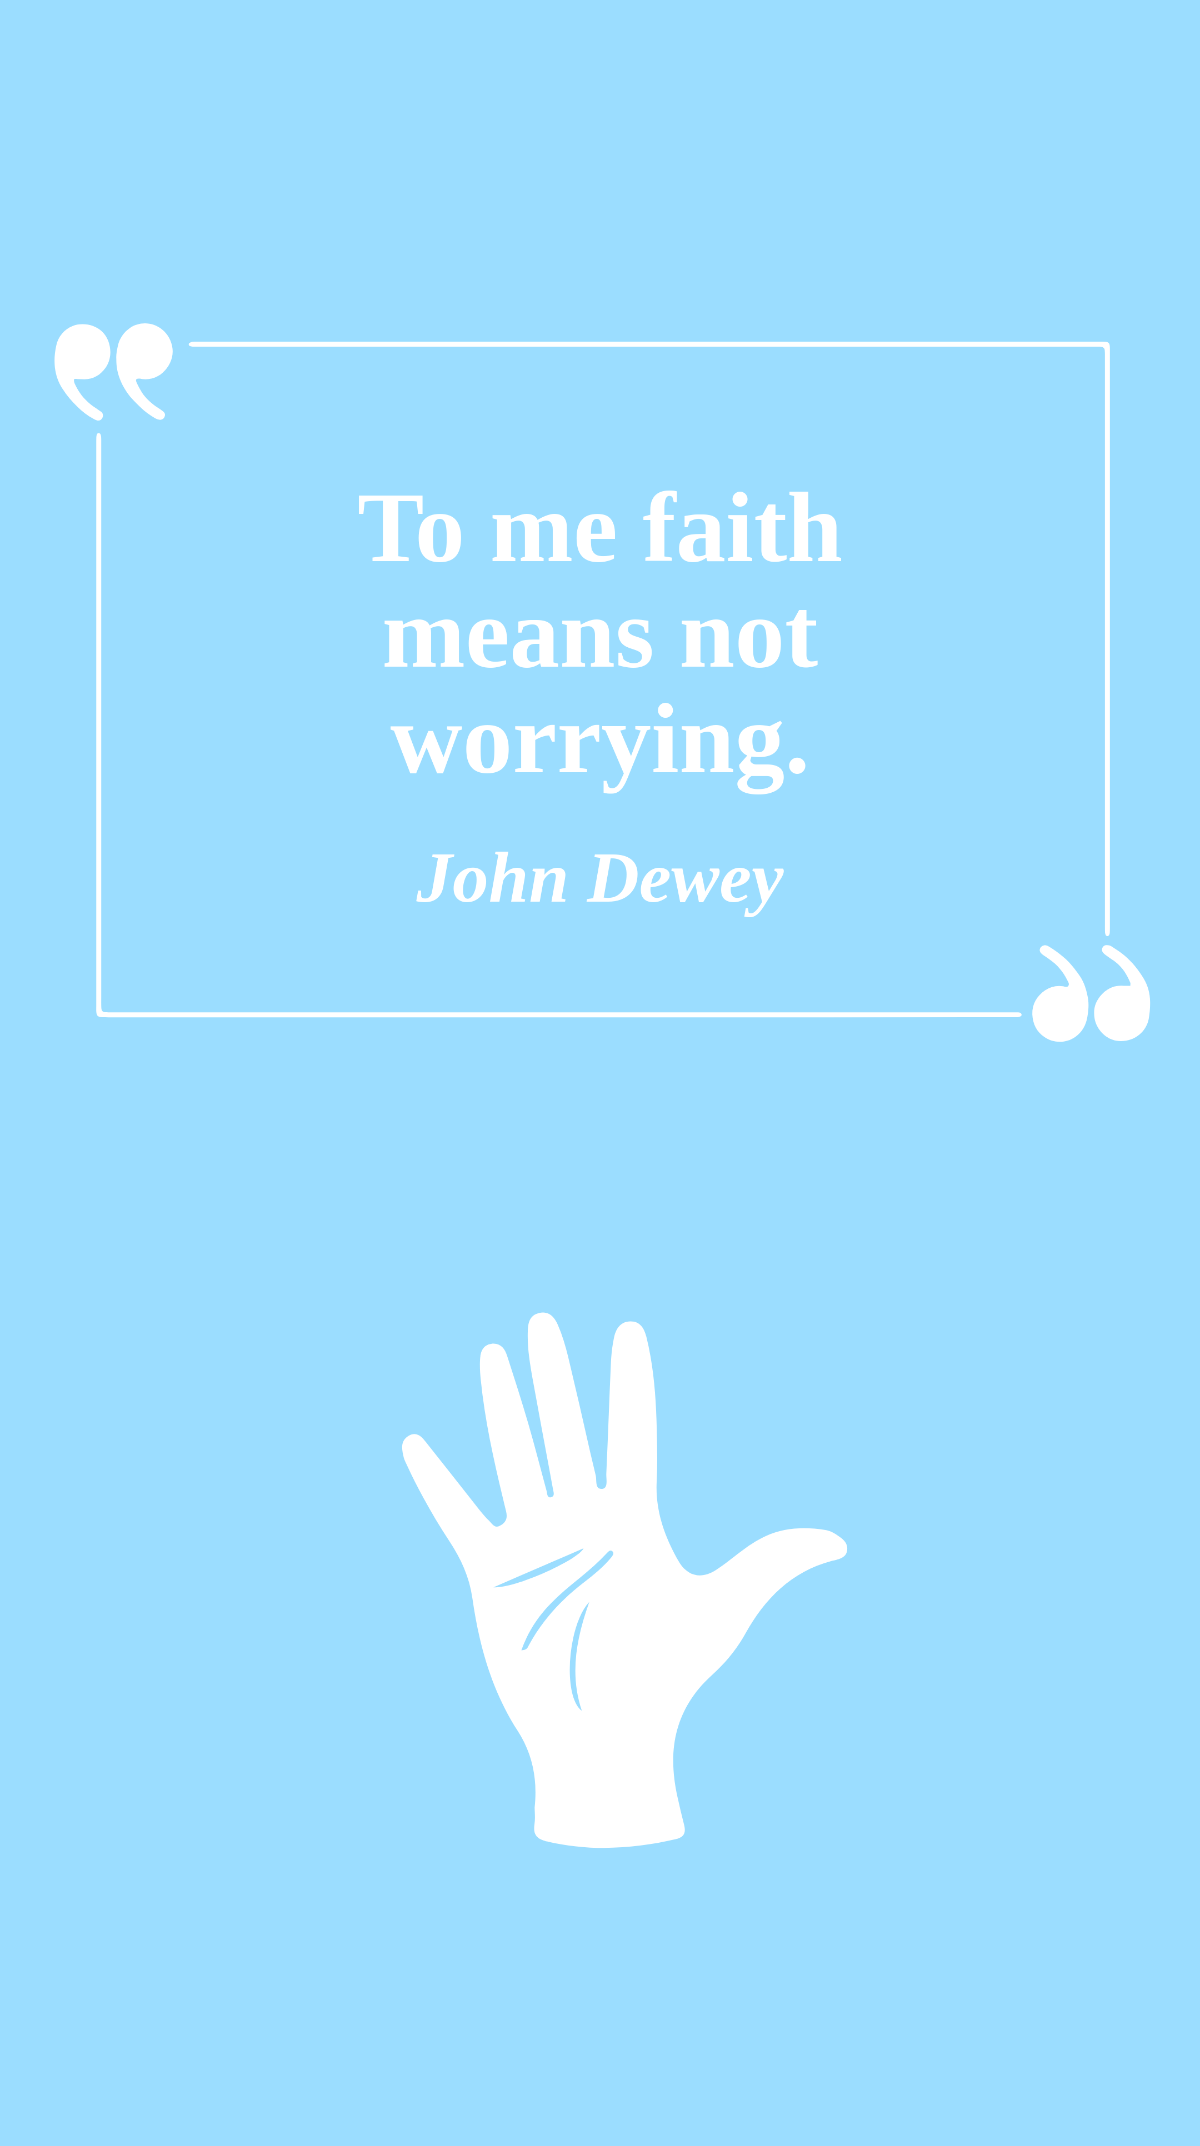 John Dewey - To me faith means not worrying. Template